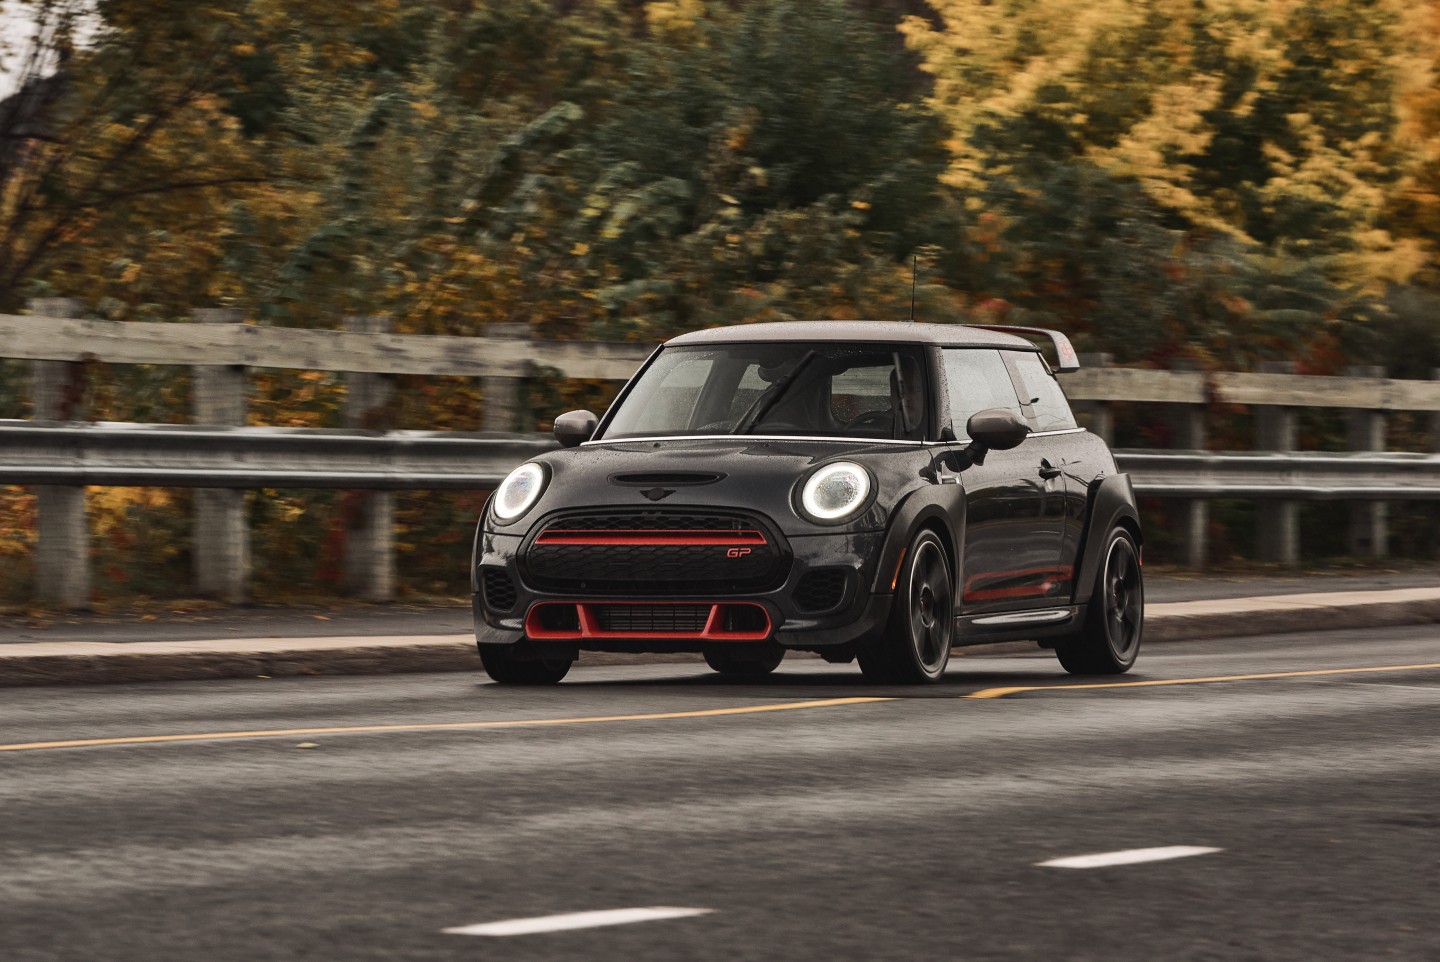 2021 MINI John Cooper Works GP Is Fast, Wild And Weird All At Once